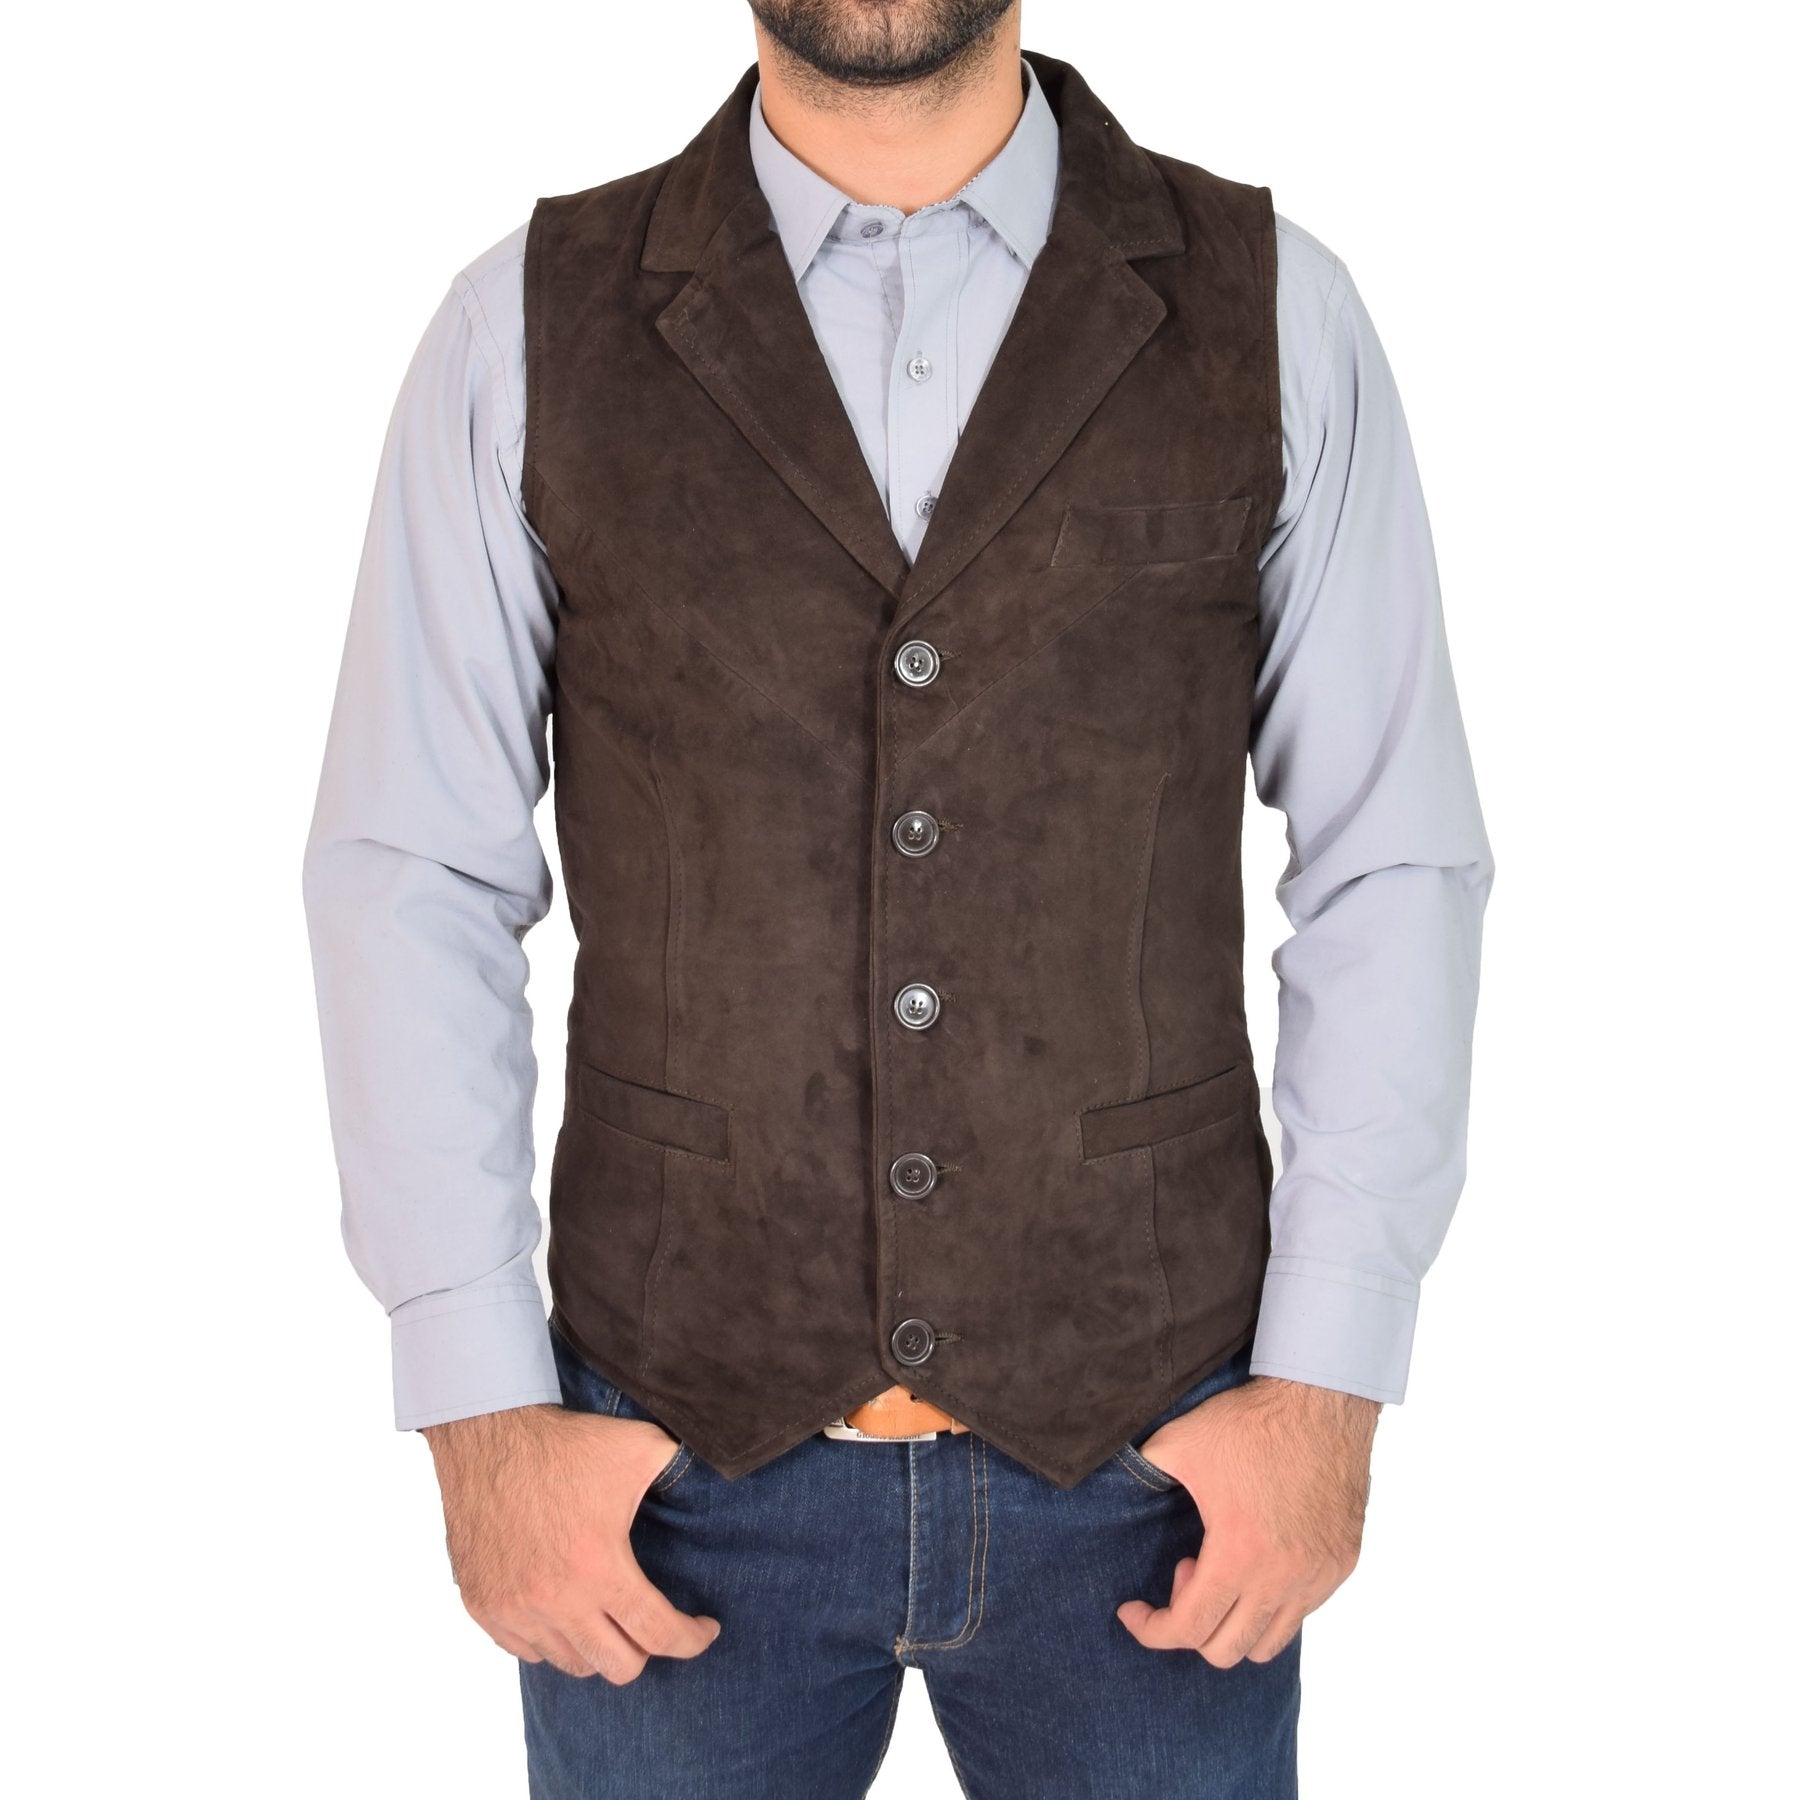 Spine Spark Men's Brown Soft Suede Leather Classic Style Vest